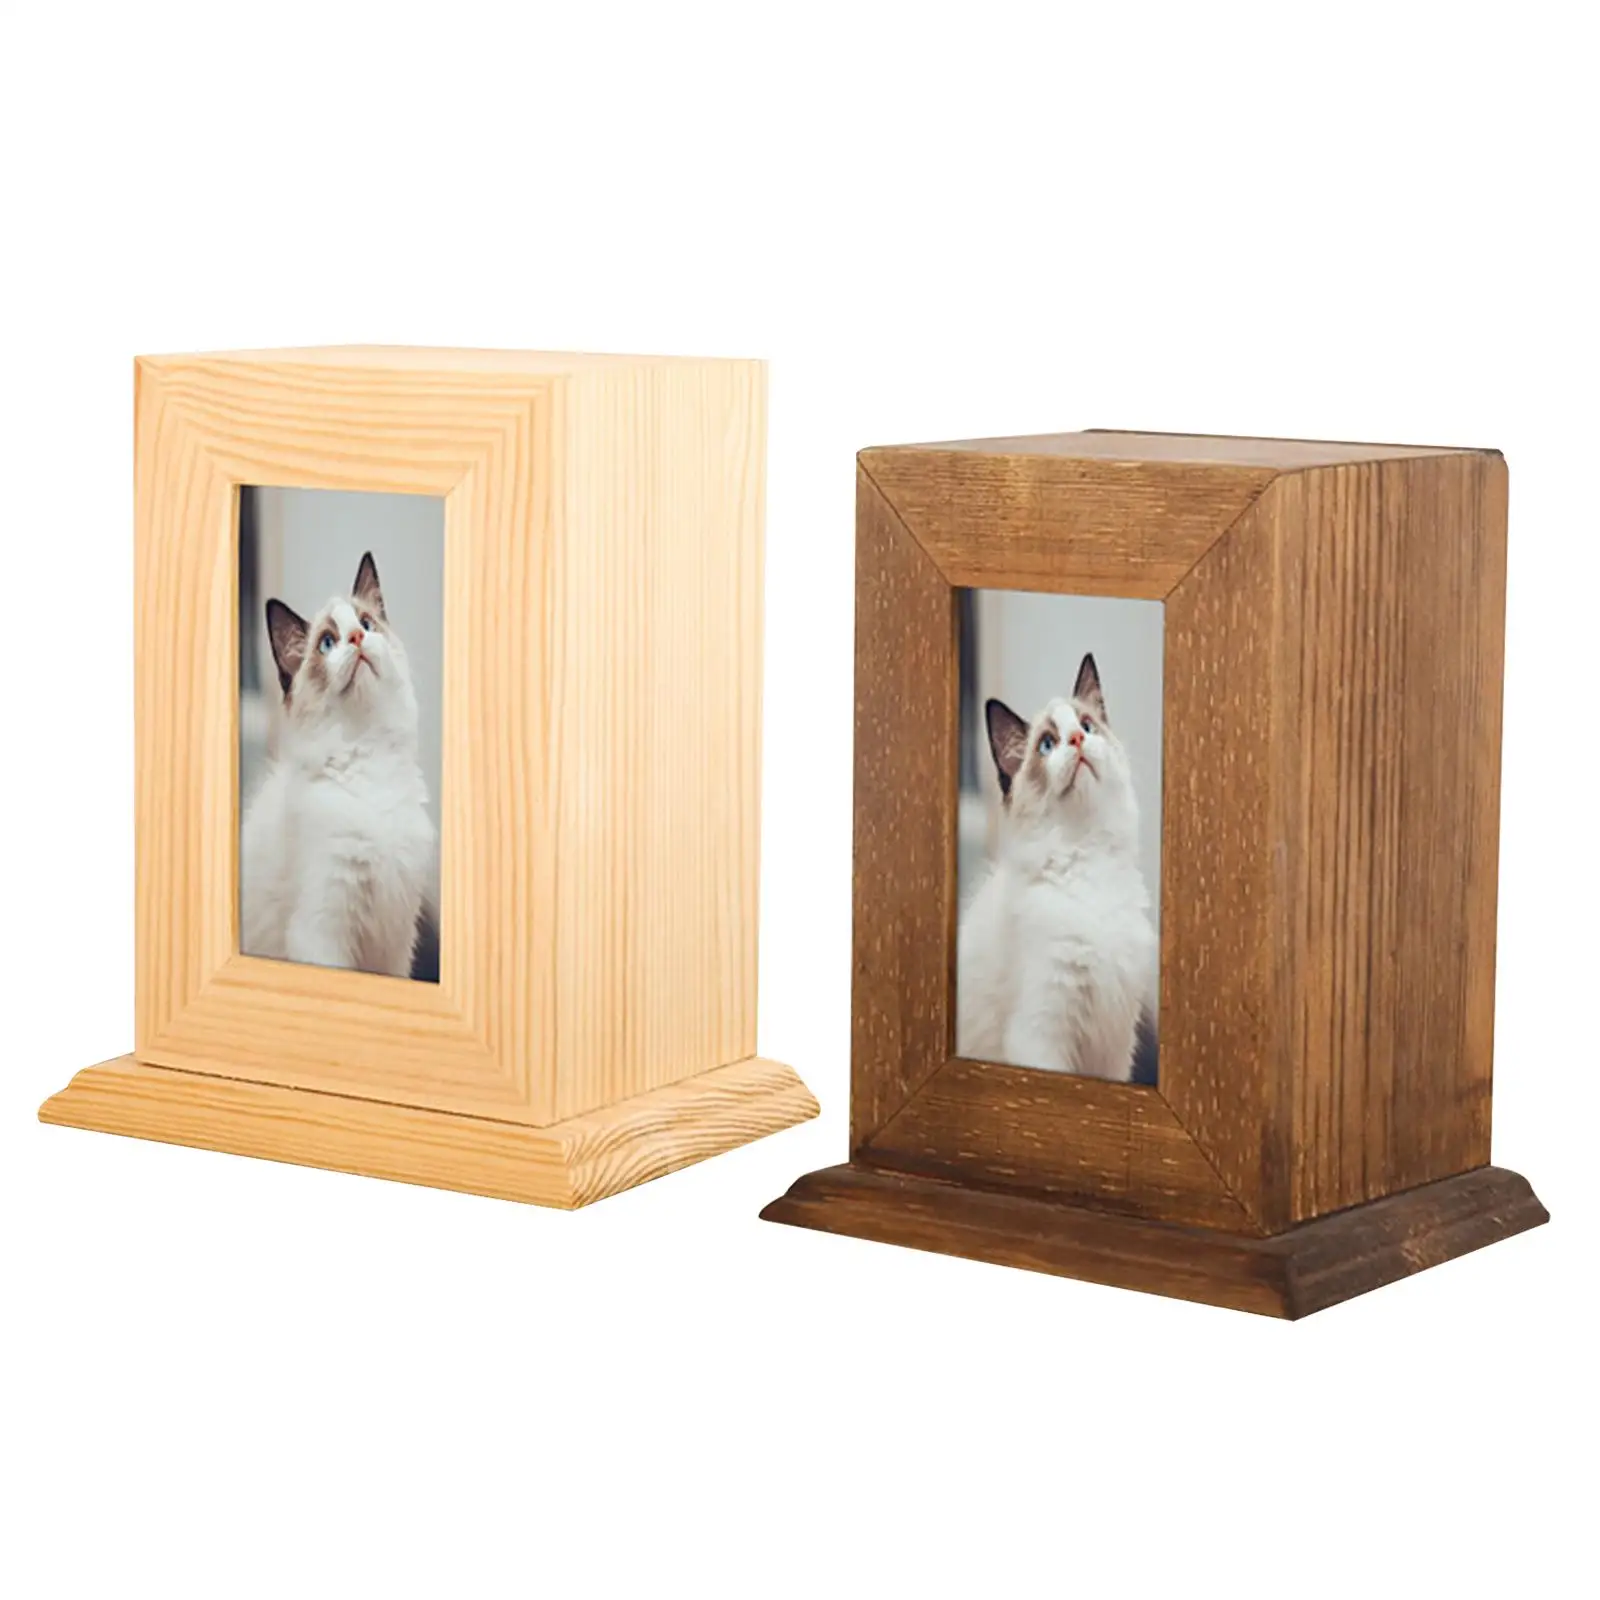 Wooden Pet Cremation Urn for Dogs Cats Ashes Casket Memorial Keepsake Box Commemorate Photo Frame Funeral Supplies